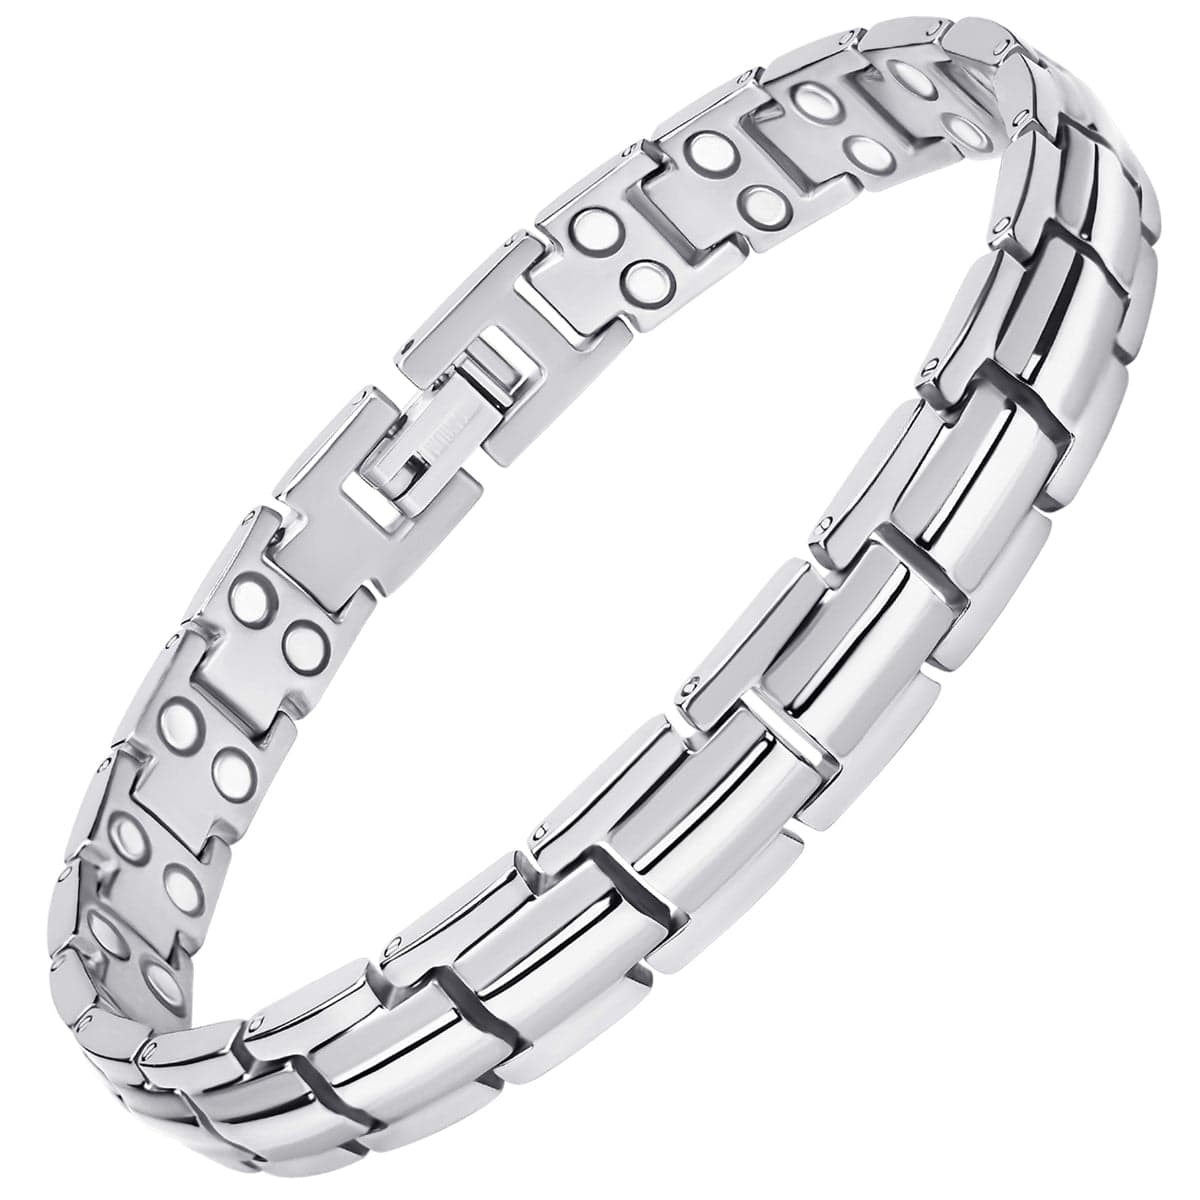 Women's Ultra Strength Silver Titanium Magnetic Therapy Bracelet